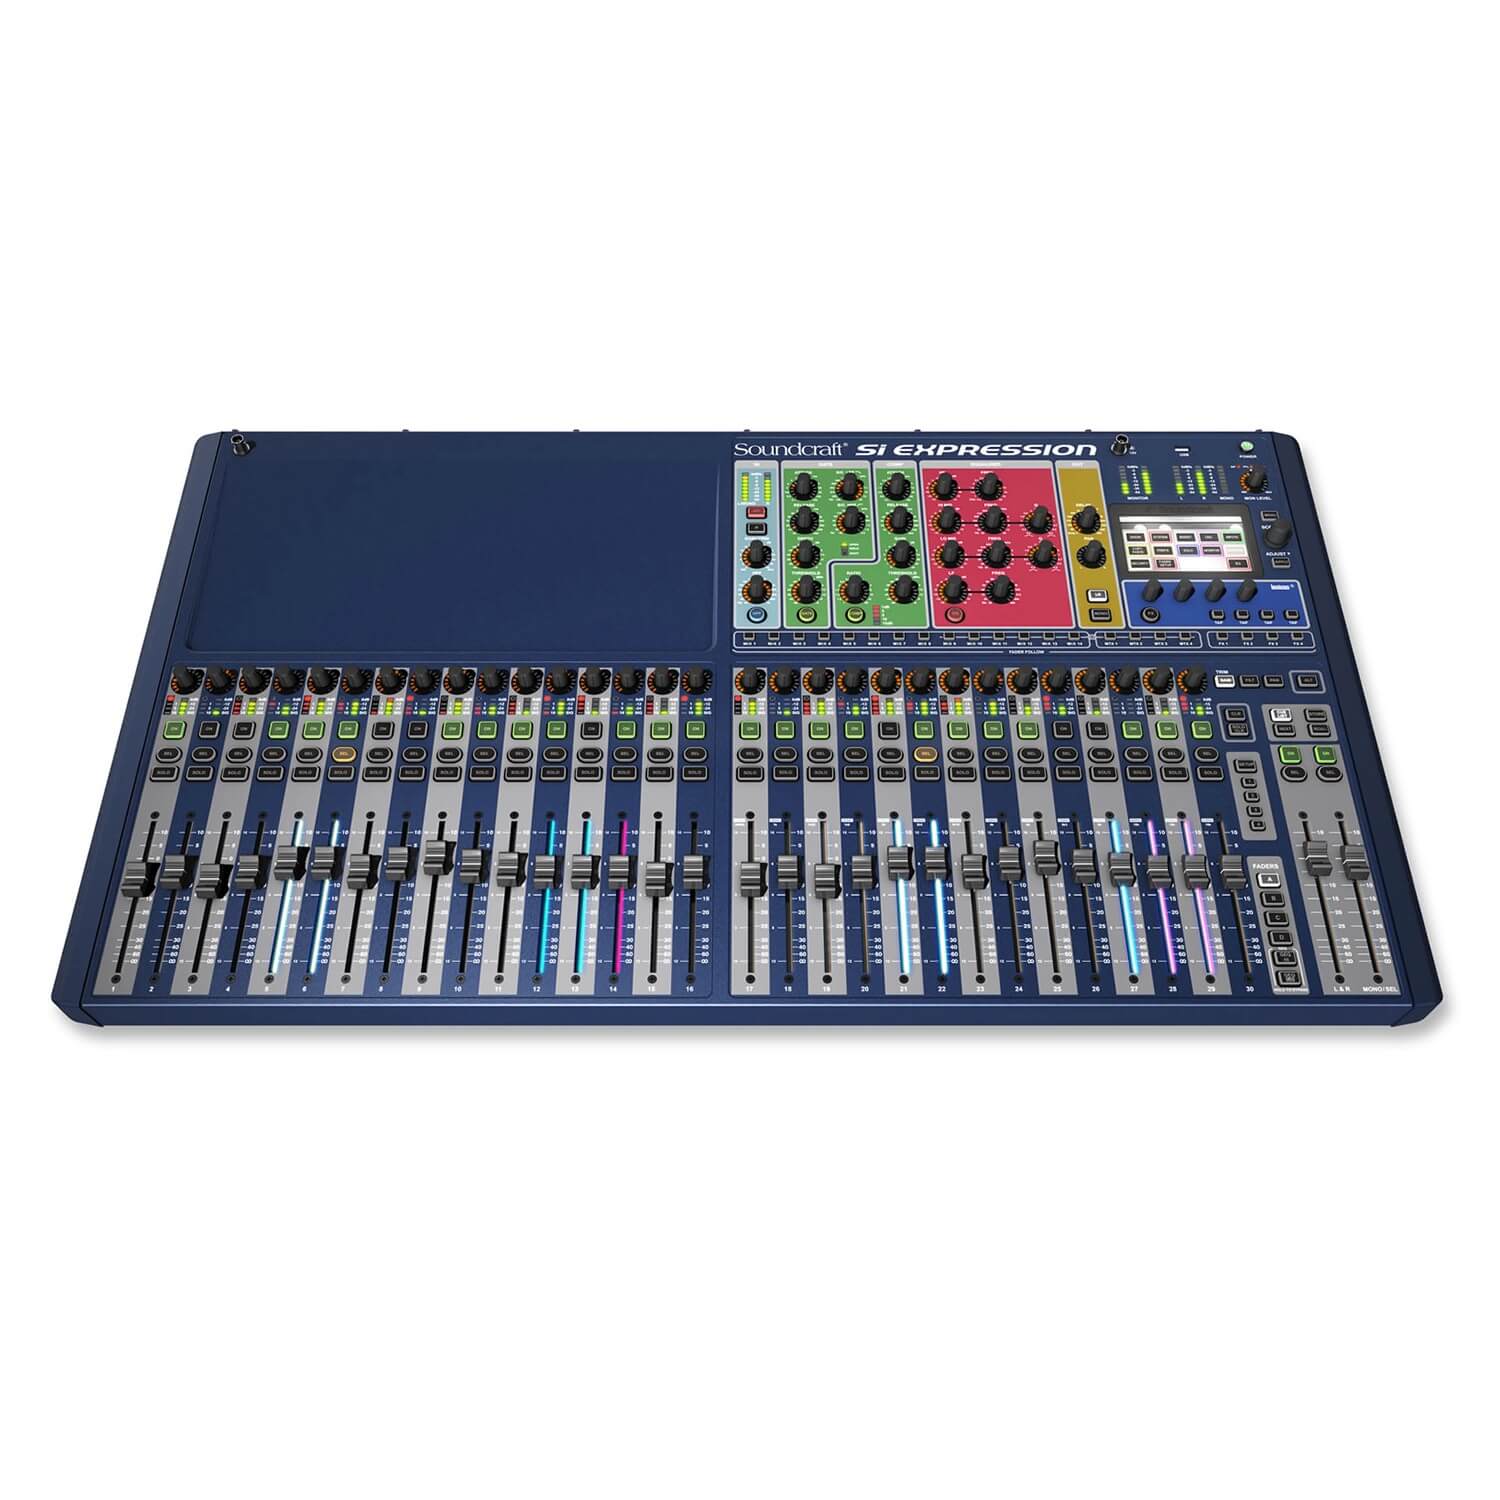 Soundcraft Si Expression 3 - 32-channel Digital Mixer, front